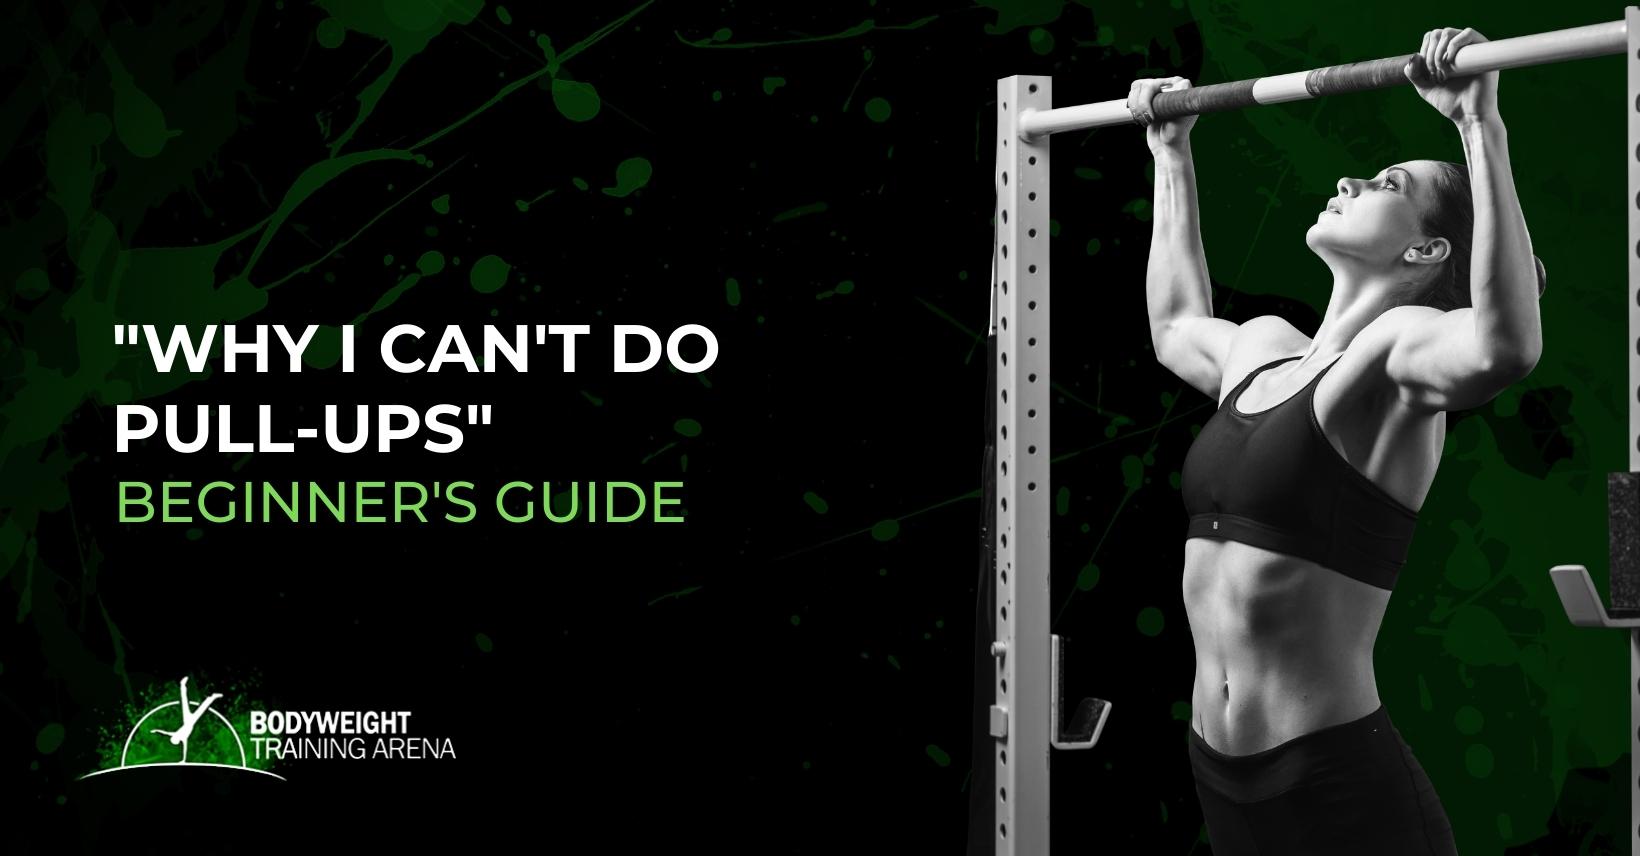 “Why I can’t do pull-ups”: Beginner’s guide